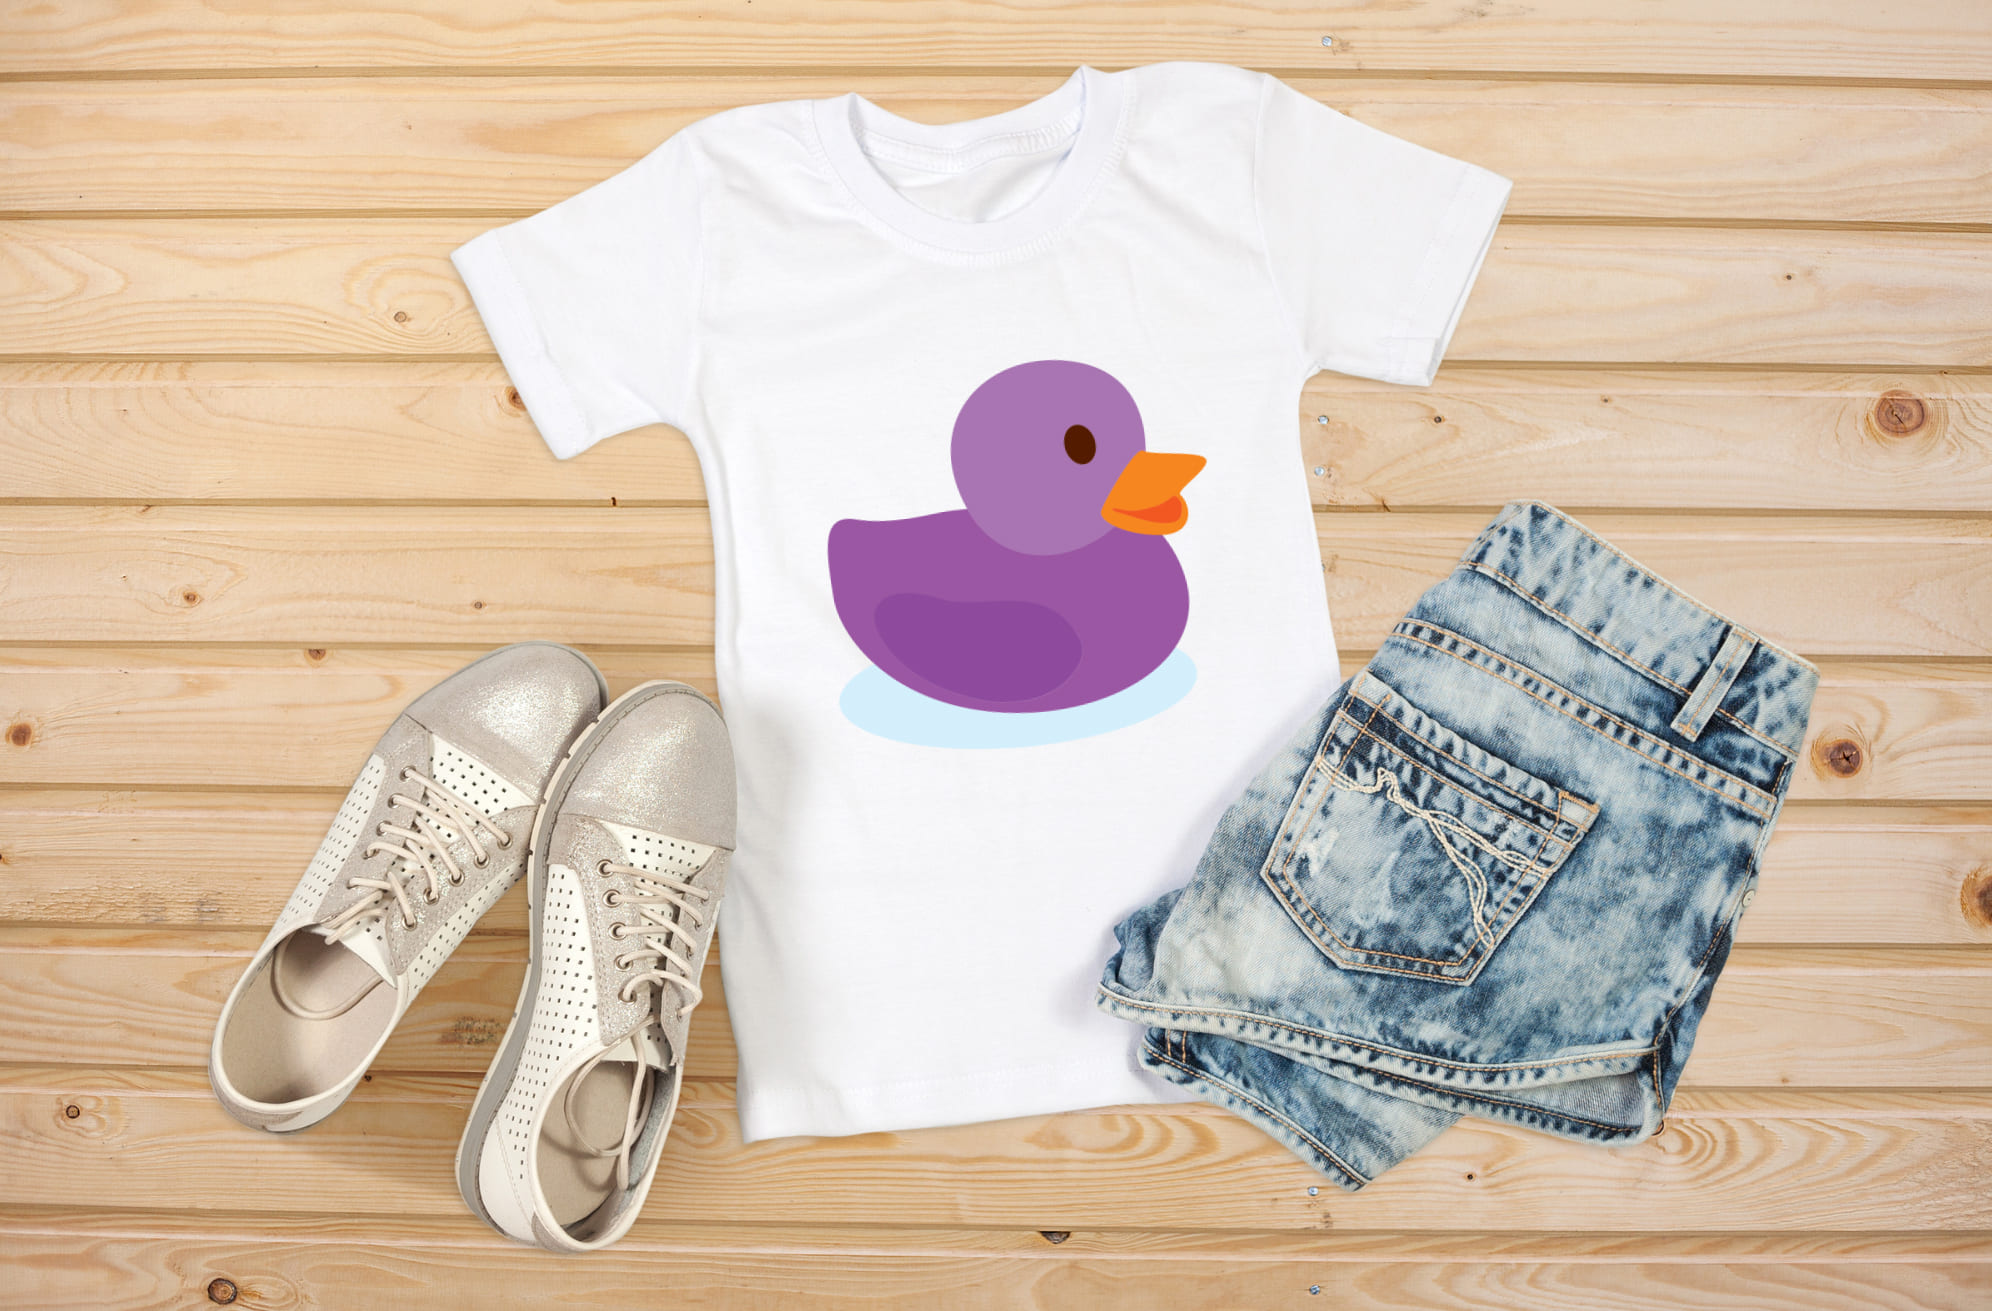 Picture of a white t-shirt with an adorable rubber duck print in purple.